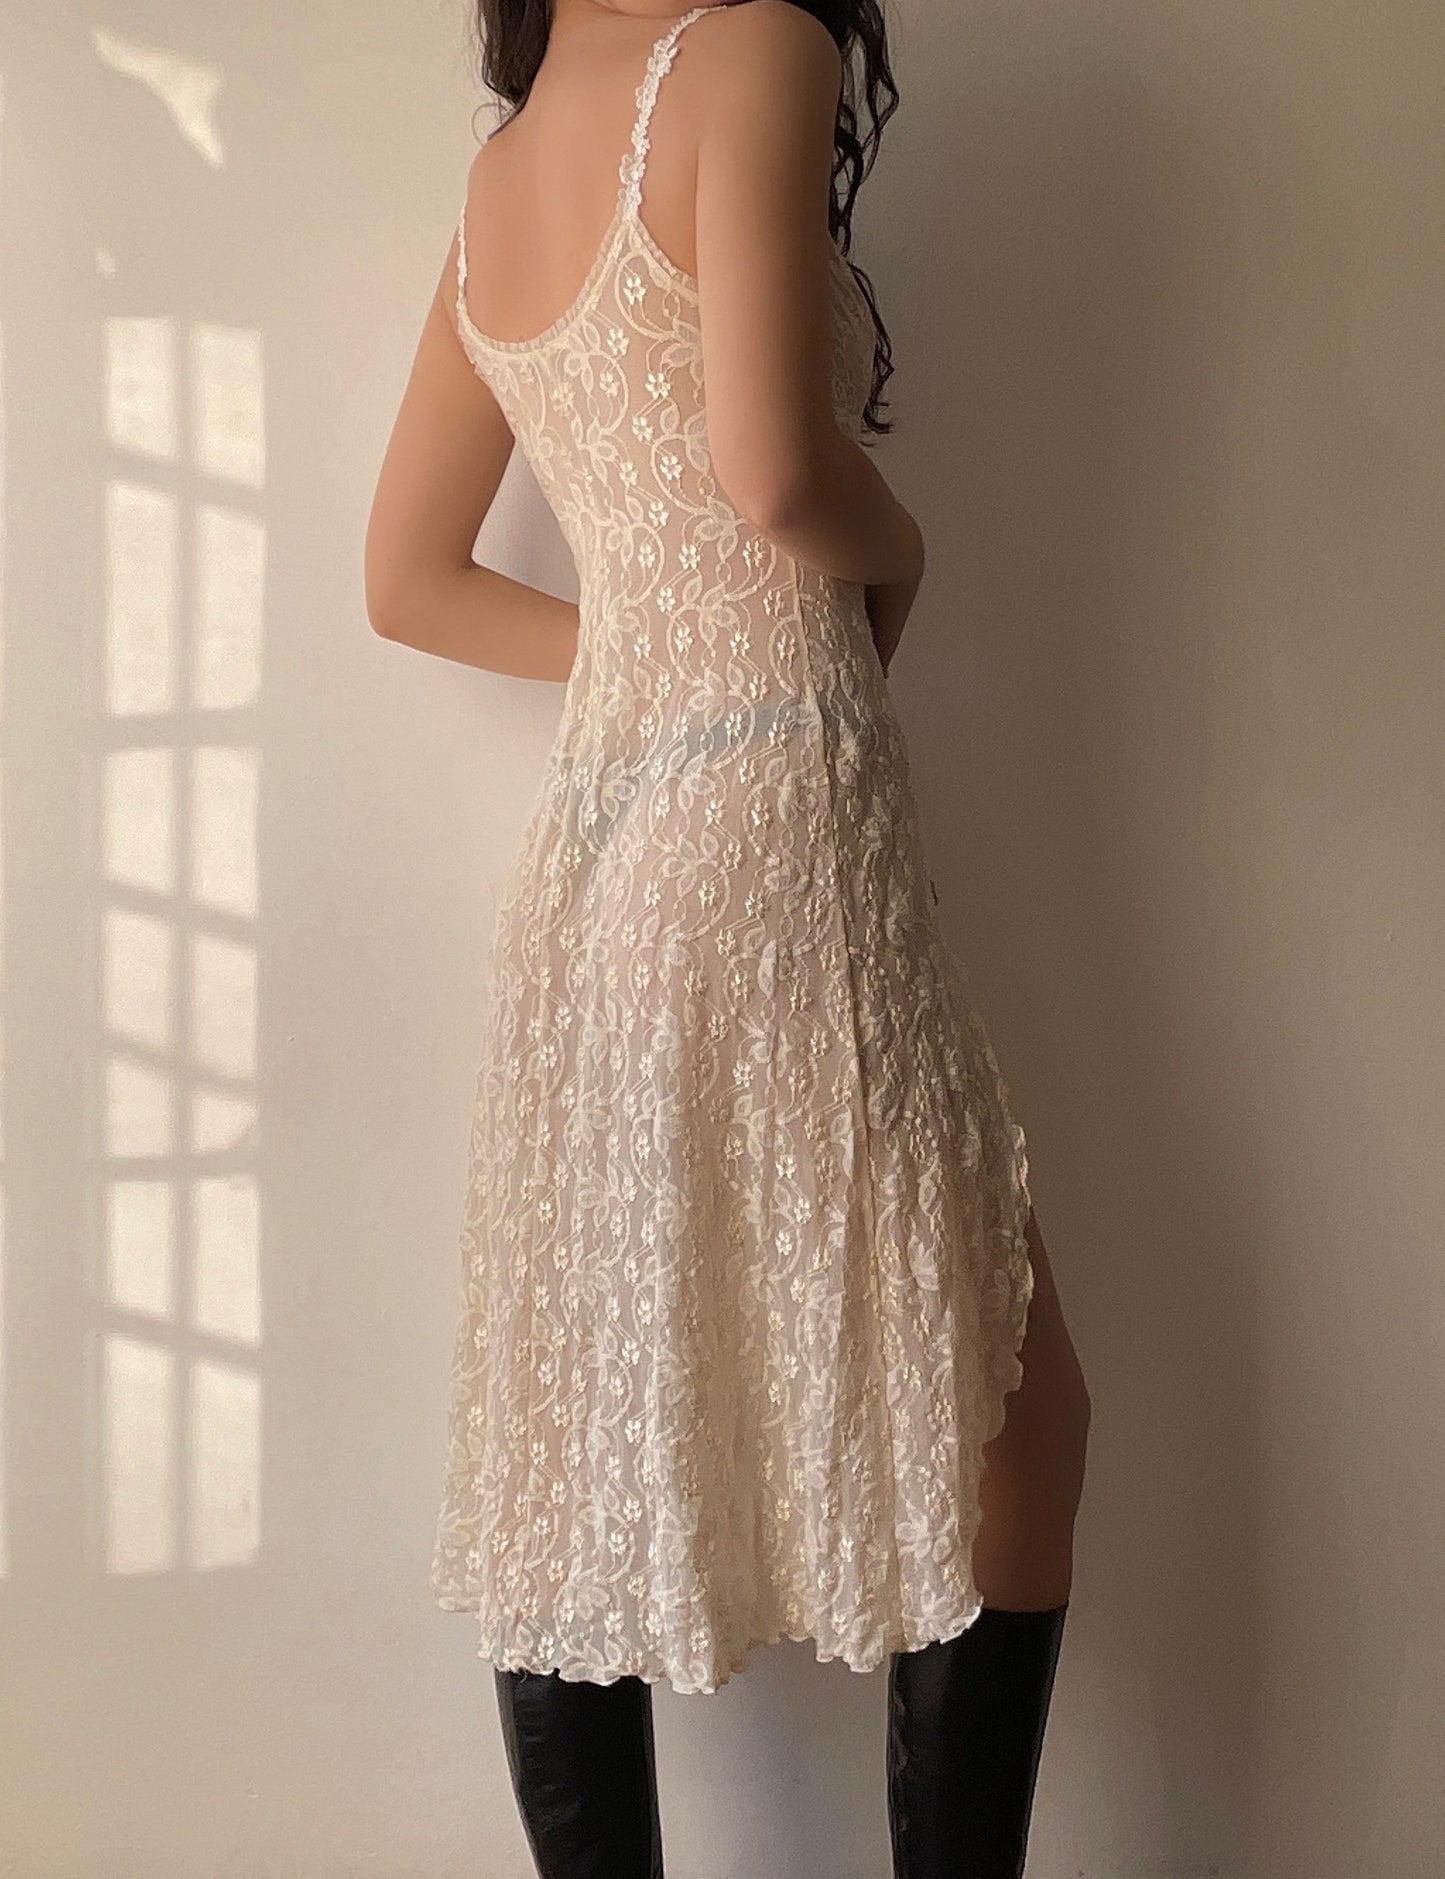 Ethereal Lace Dress (XS/S)